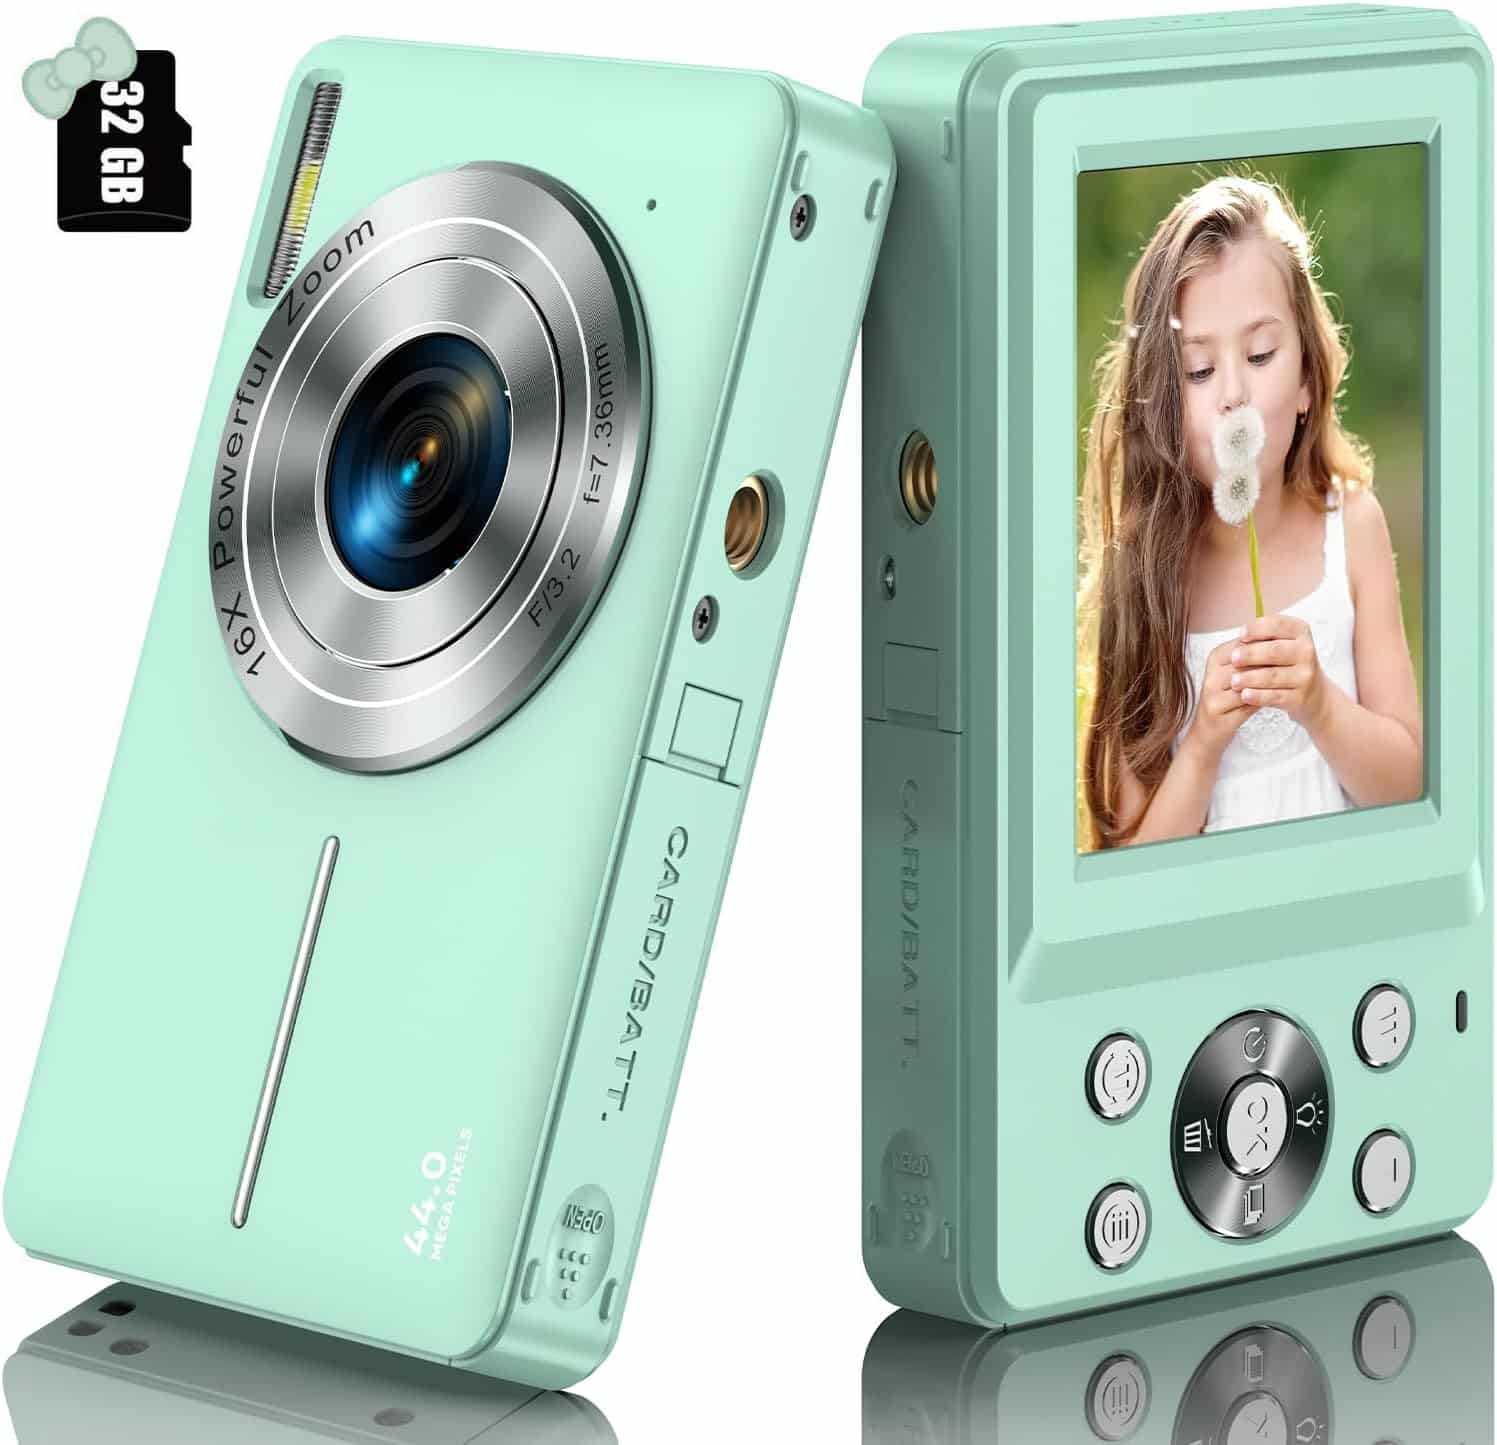 Digital Camera, Kids Camera FHD 1080P 44MP Compact Digital Camera with 32GB SD Card Small Vlogging Camera 16X Digital Zoom, Mini Point and Shoot Camera Gift for Kids Boys Girls Teens Students (Green)